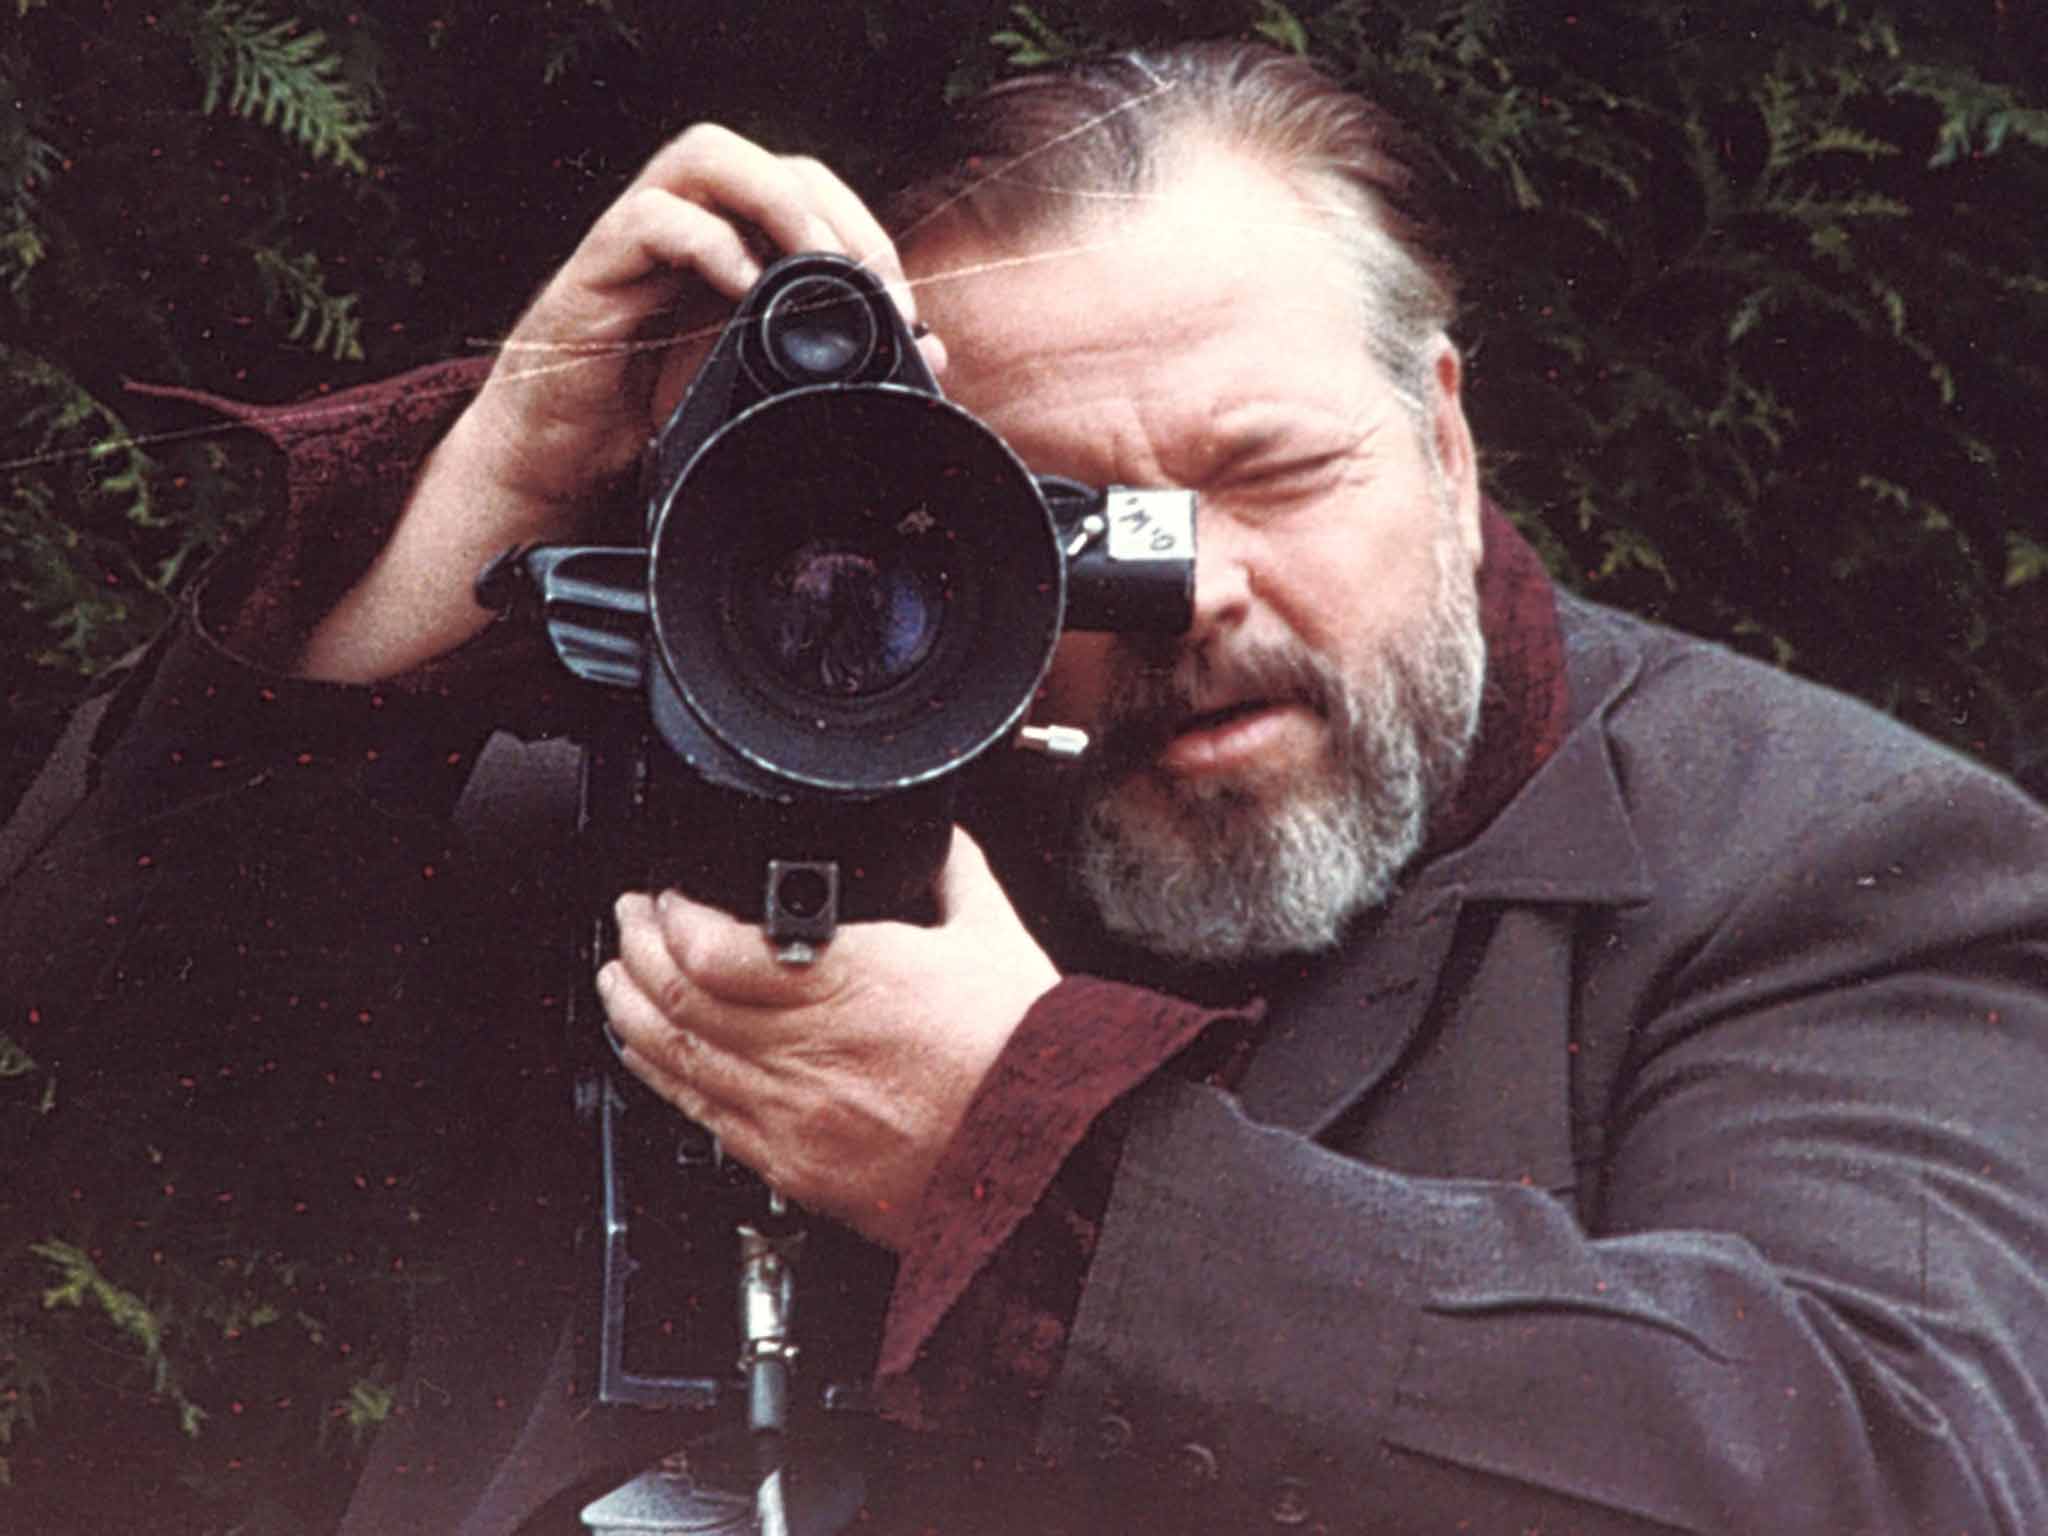 Shooting star: Orson Welles on set in the Seventies